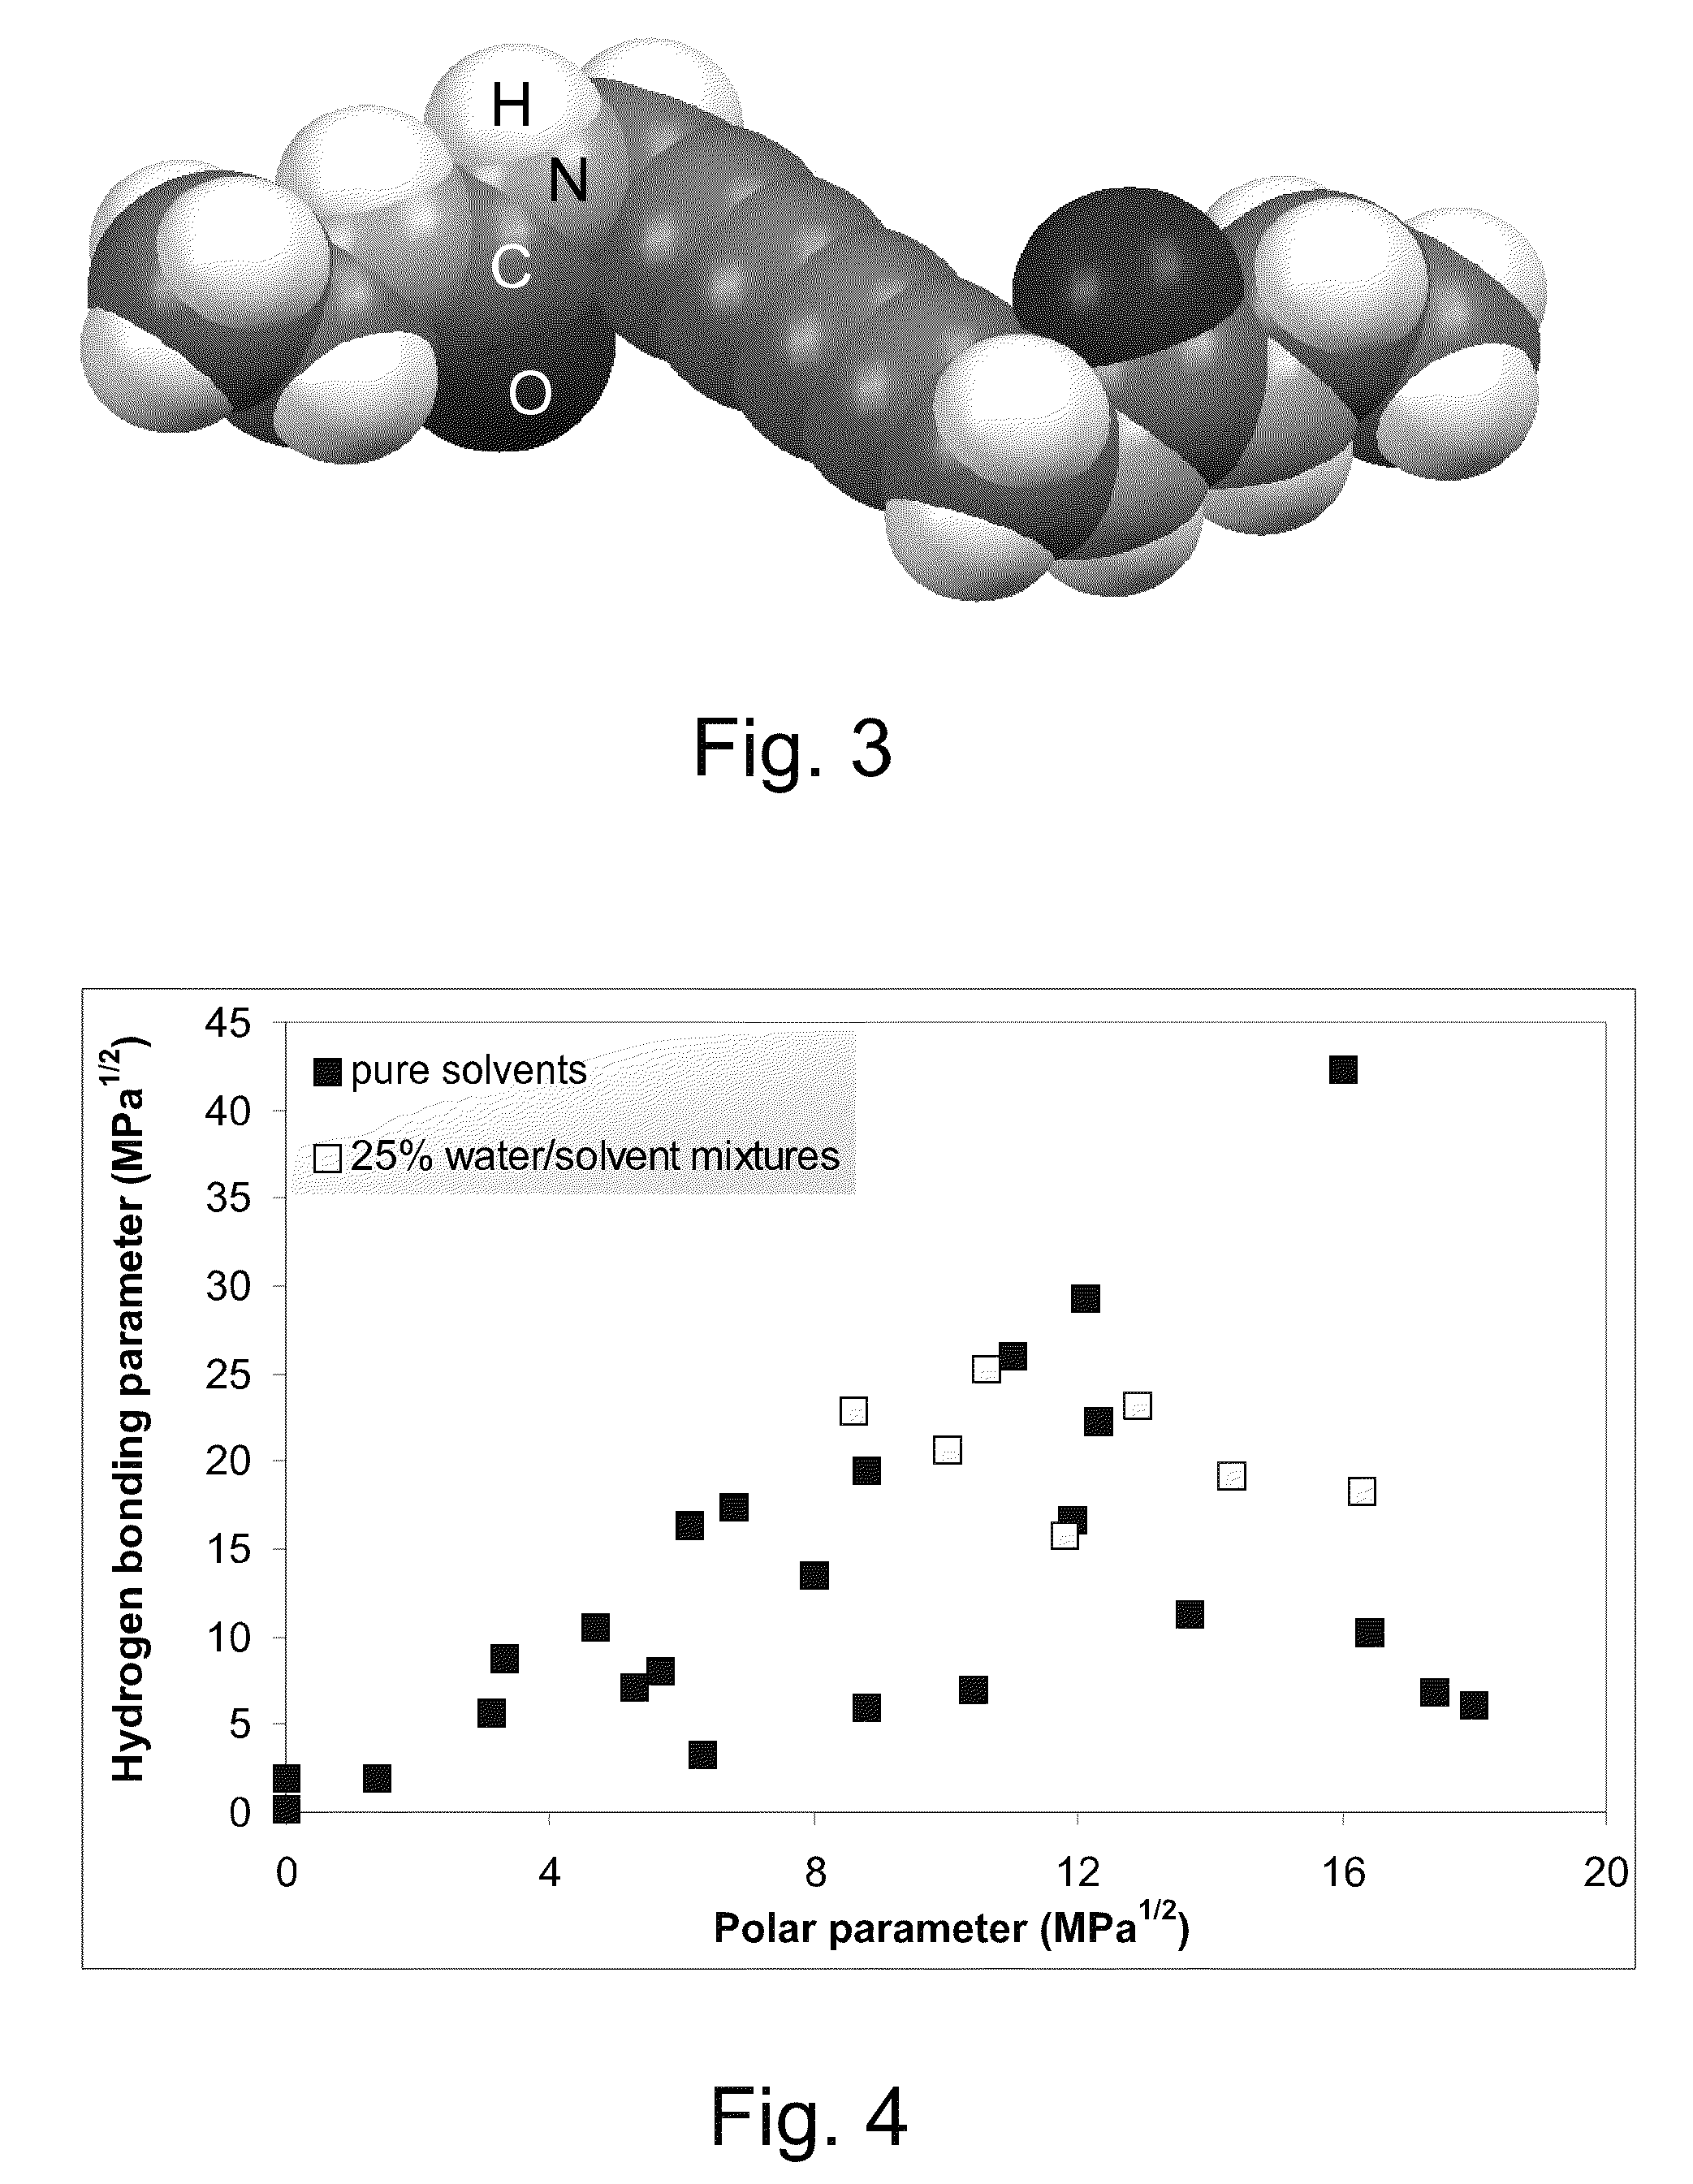 Crystallized diacetylenic indicator compounds and methods of preparing the compounds